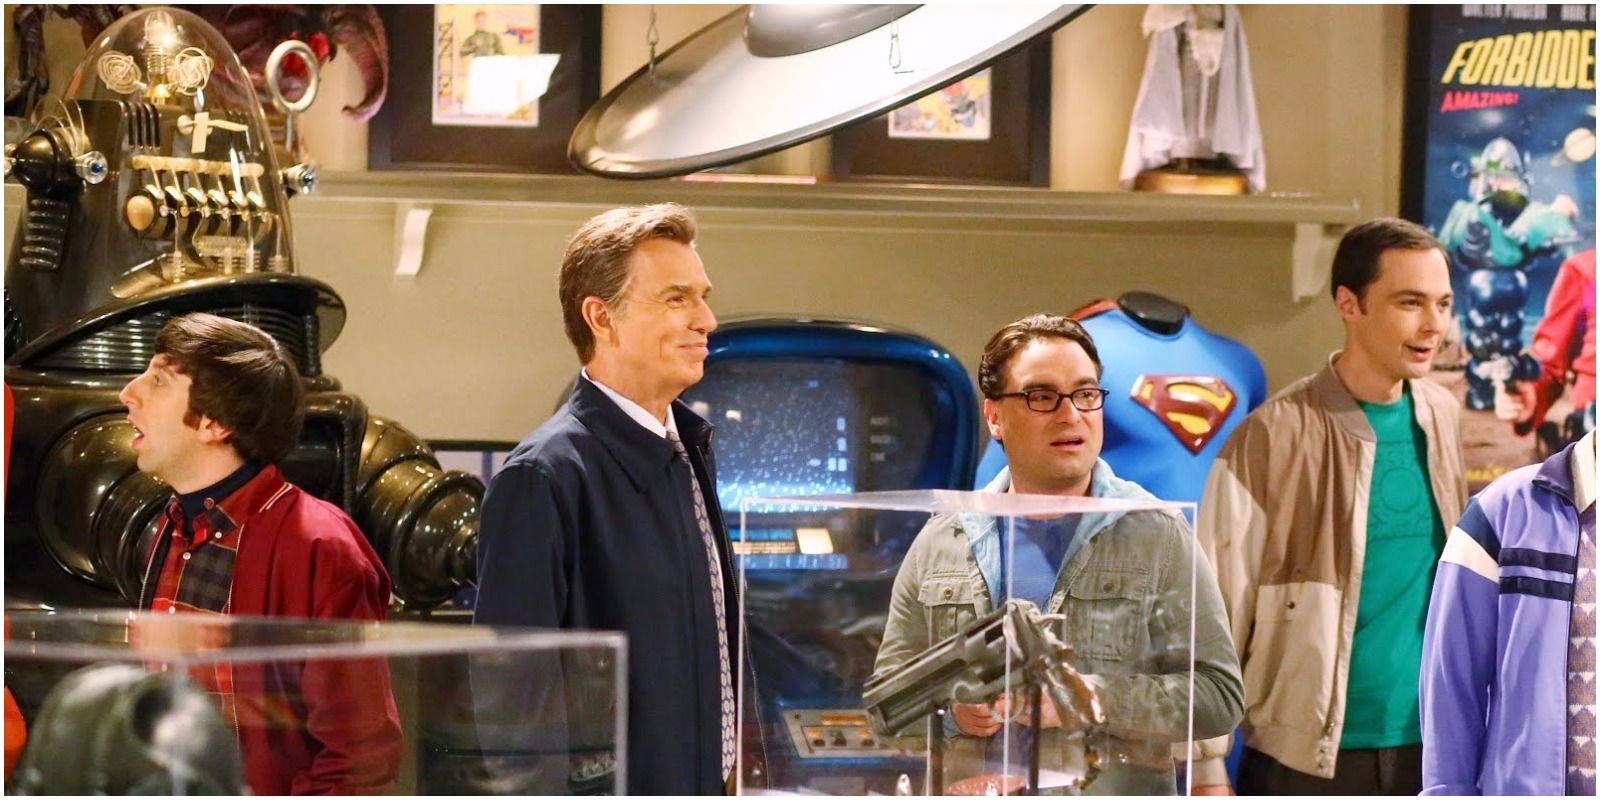 Billy Bob Thorntons Character showing the gang his movie memorabilia collection from The Big Bang Theory